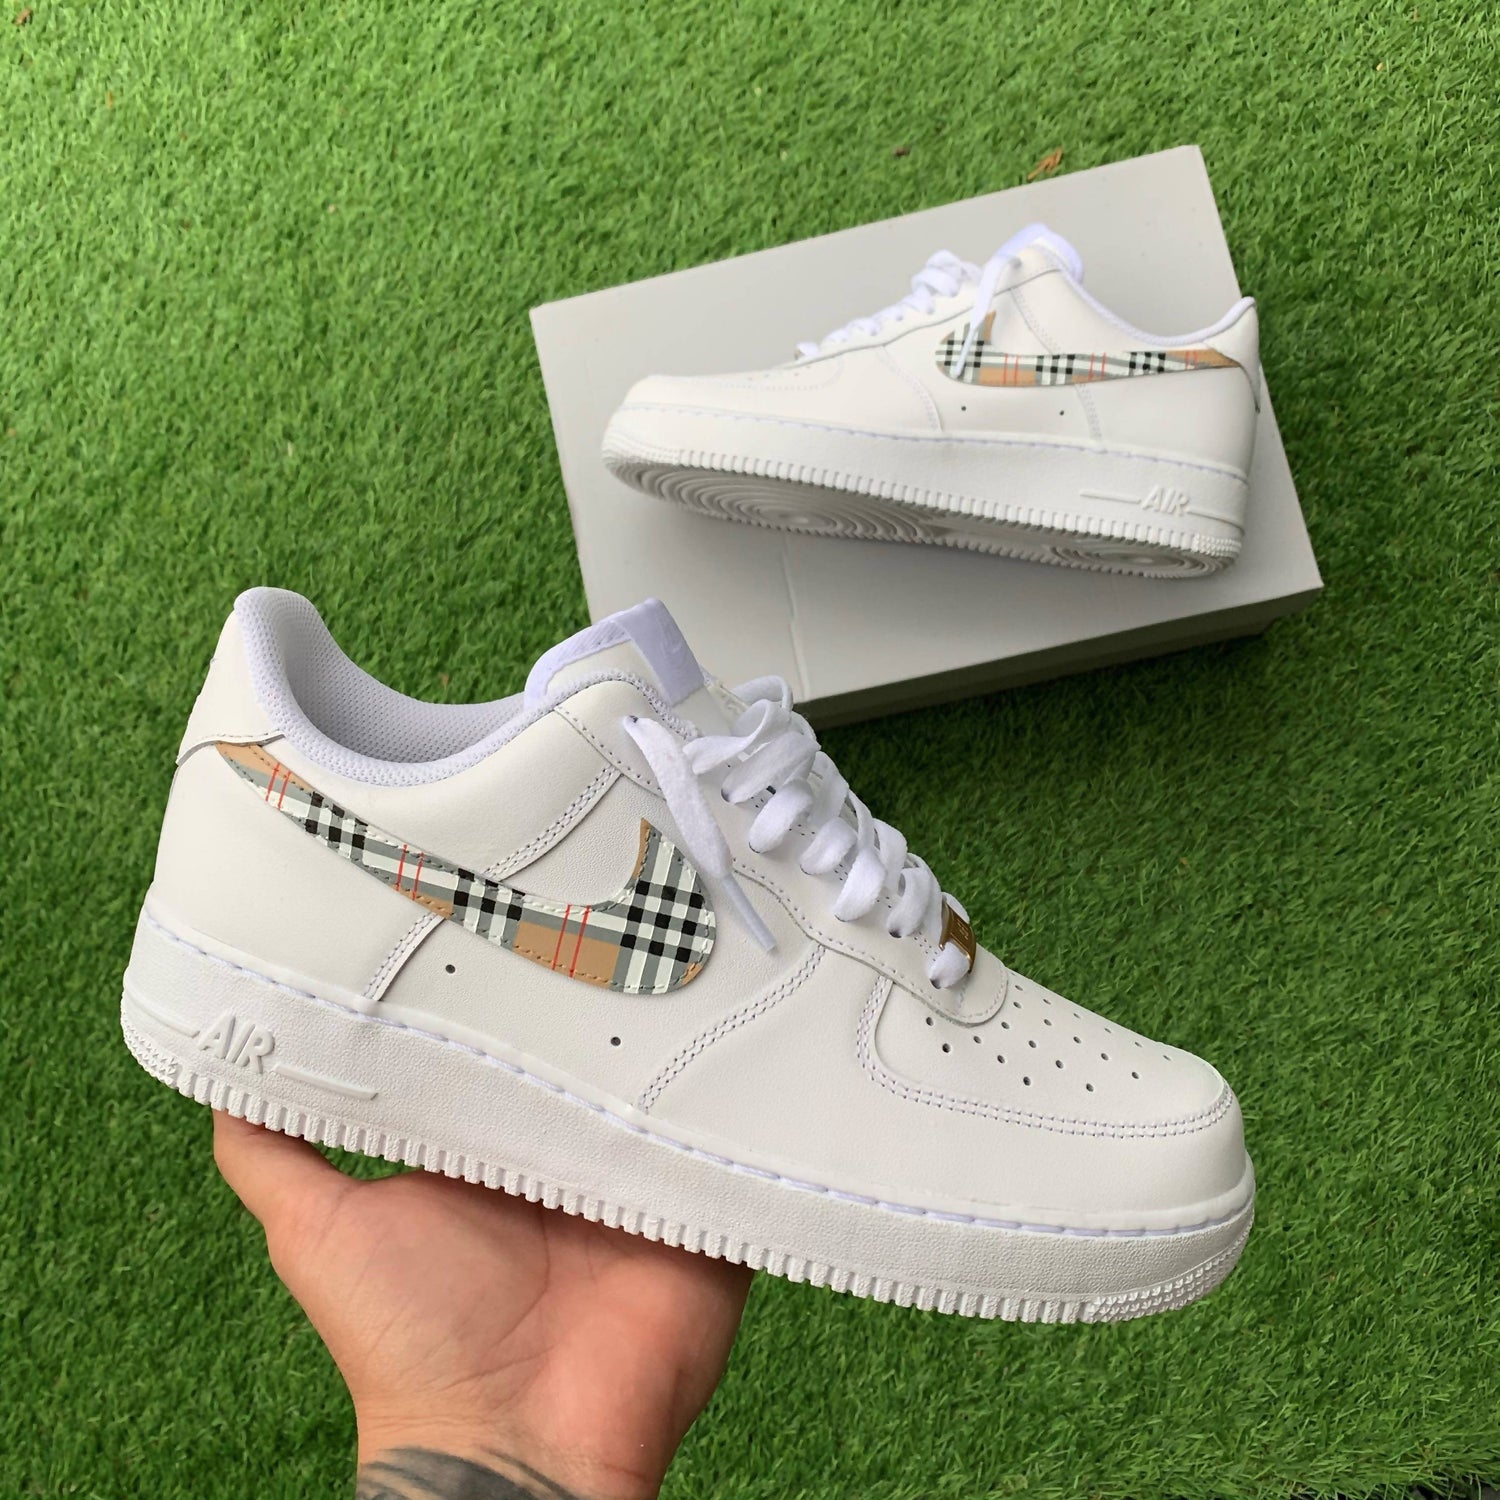 'Burberry' Air Force 1